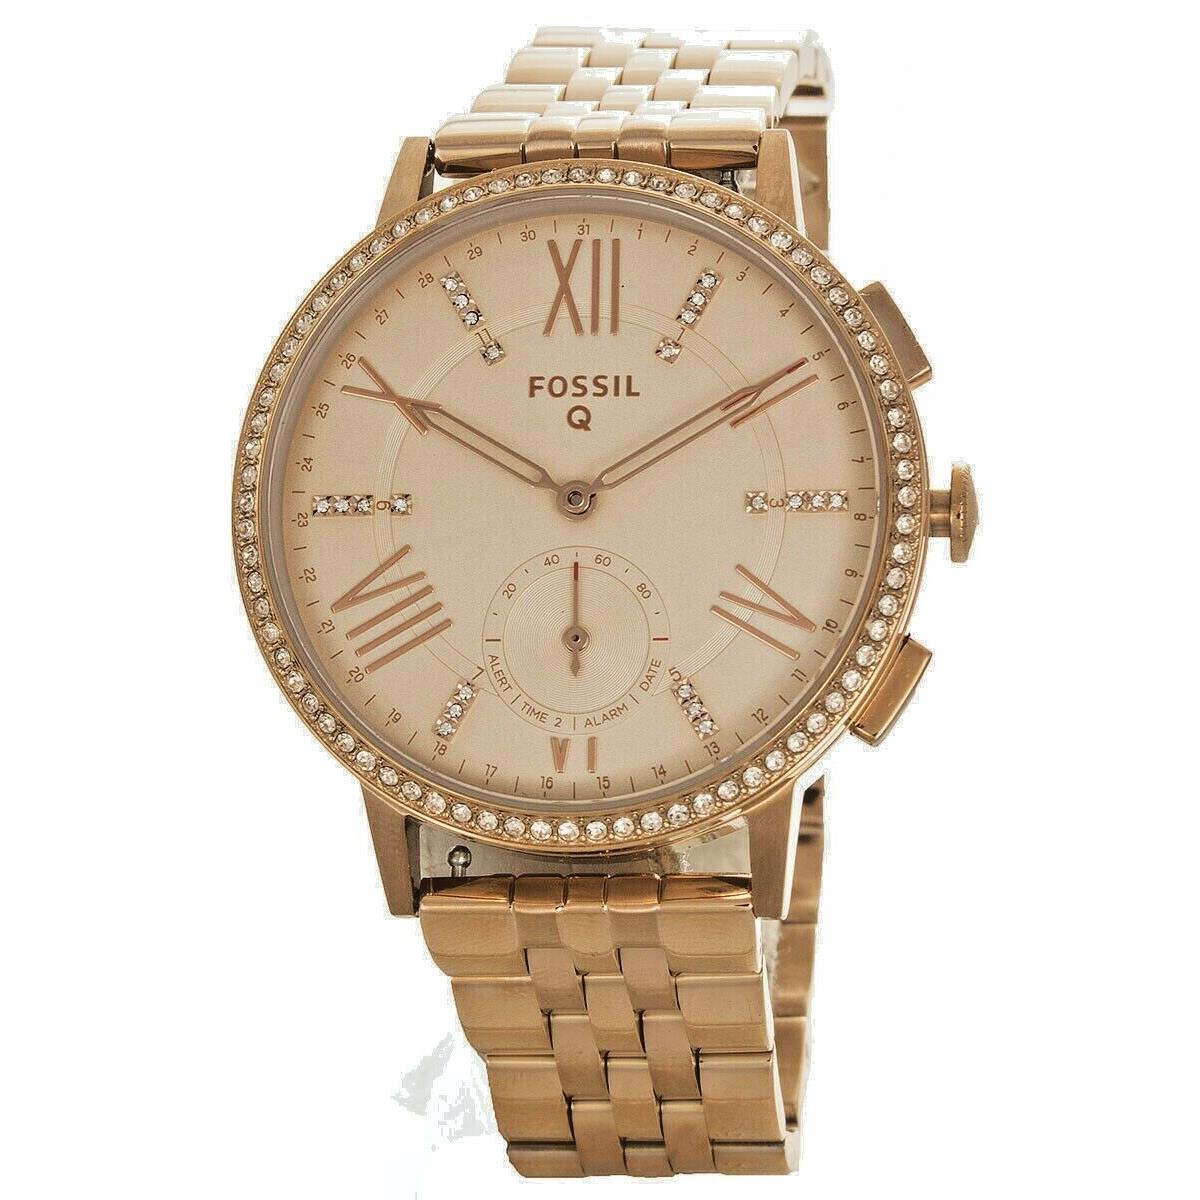 Fossil Q Hybrid Virginia Rose Gold-tone Stainless Steel Smartwatch FTW1106 - Dial: Rose Gold, Bezel: Rose Gold